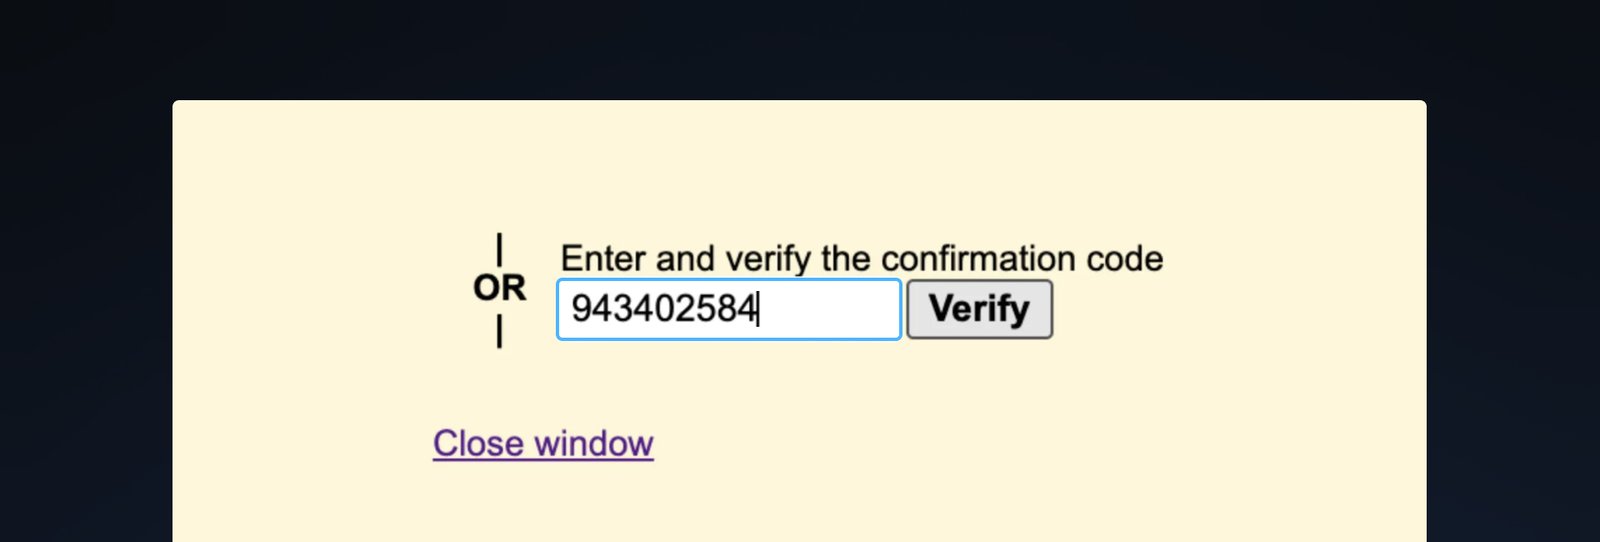 Entering the verification code to Bluehost